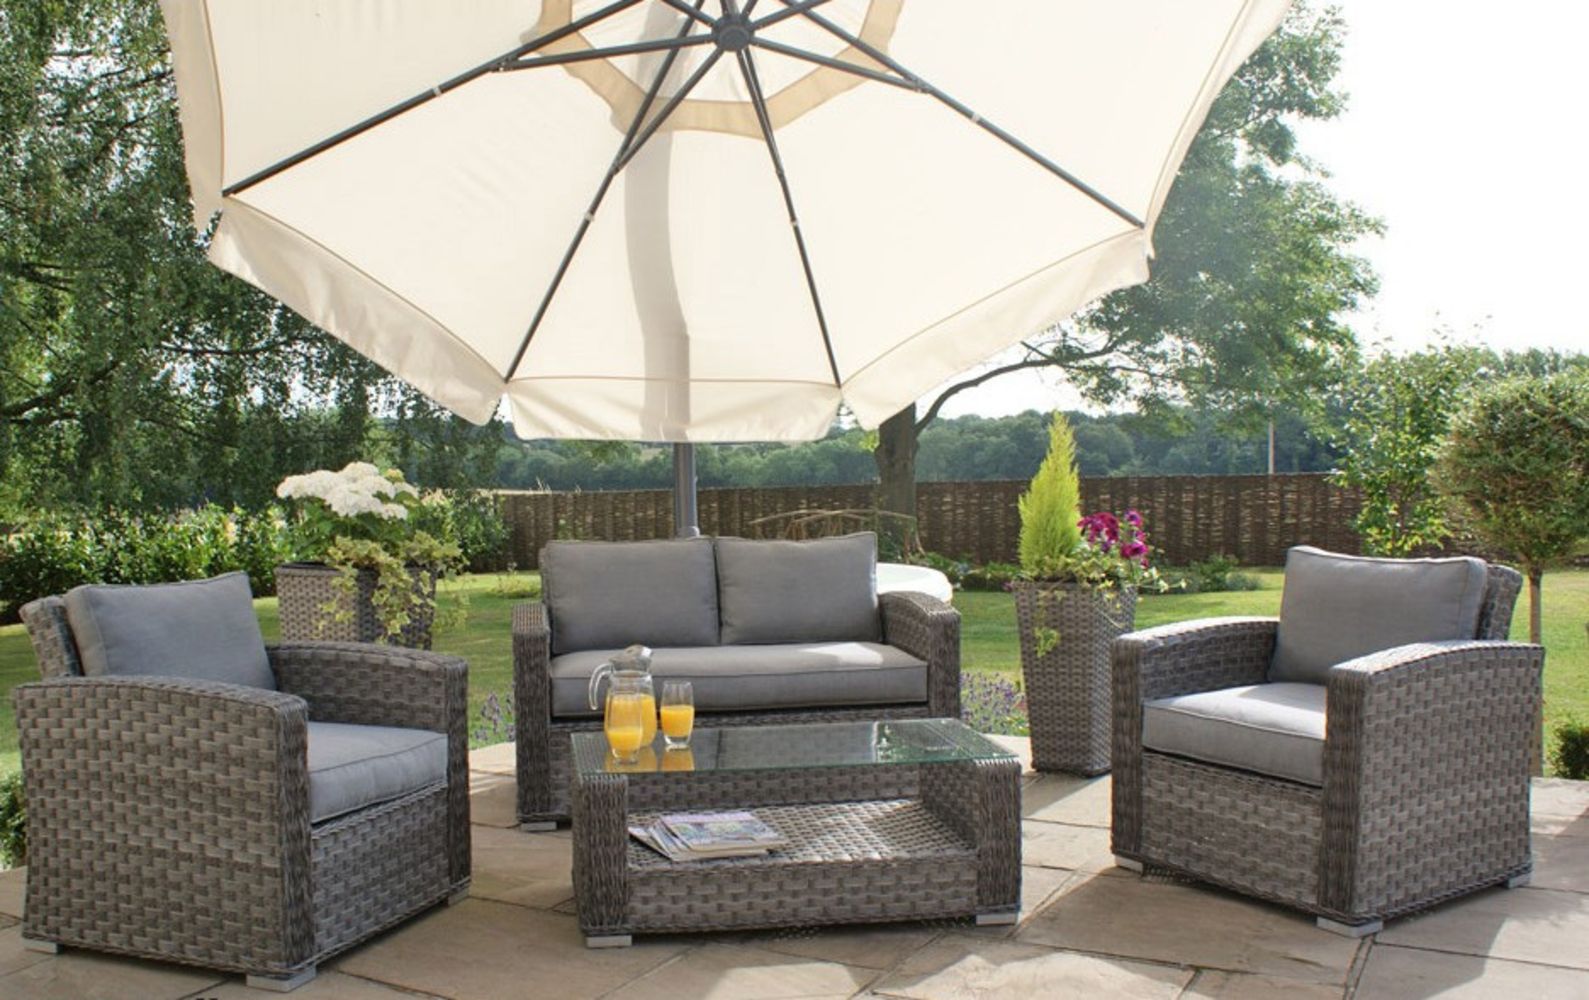 Brand New Rattan Garden Furniture: Exclusive Range Including Dining Sets, Sun Beds, Coffee Tables